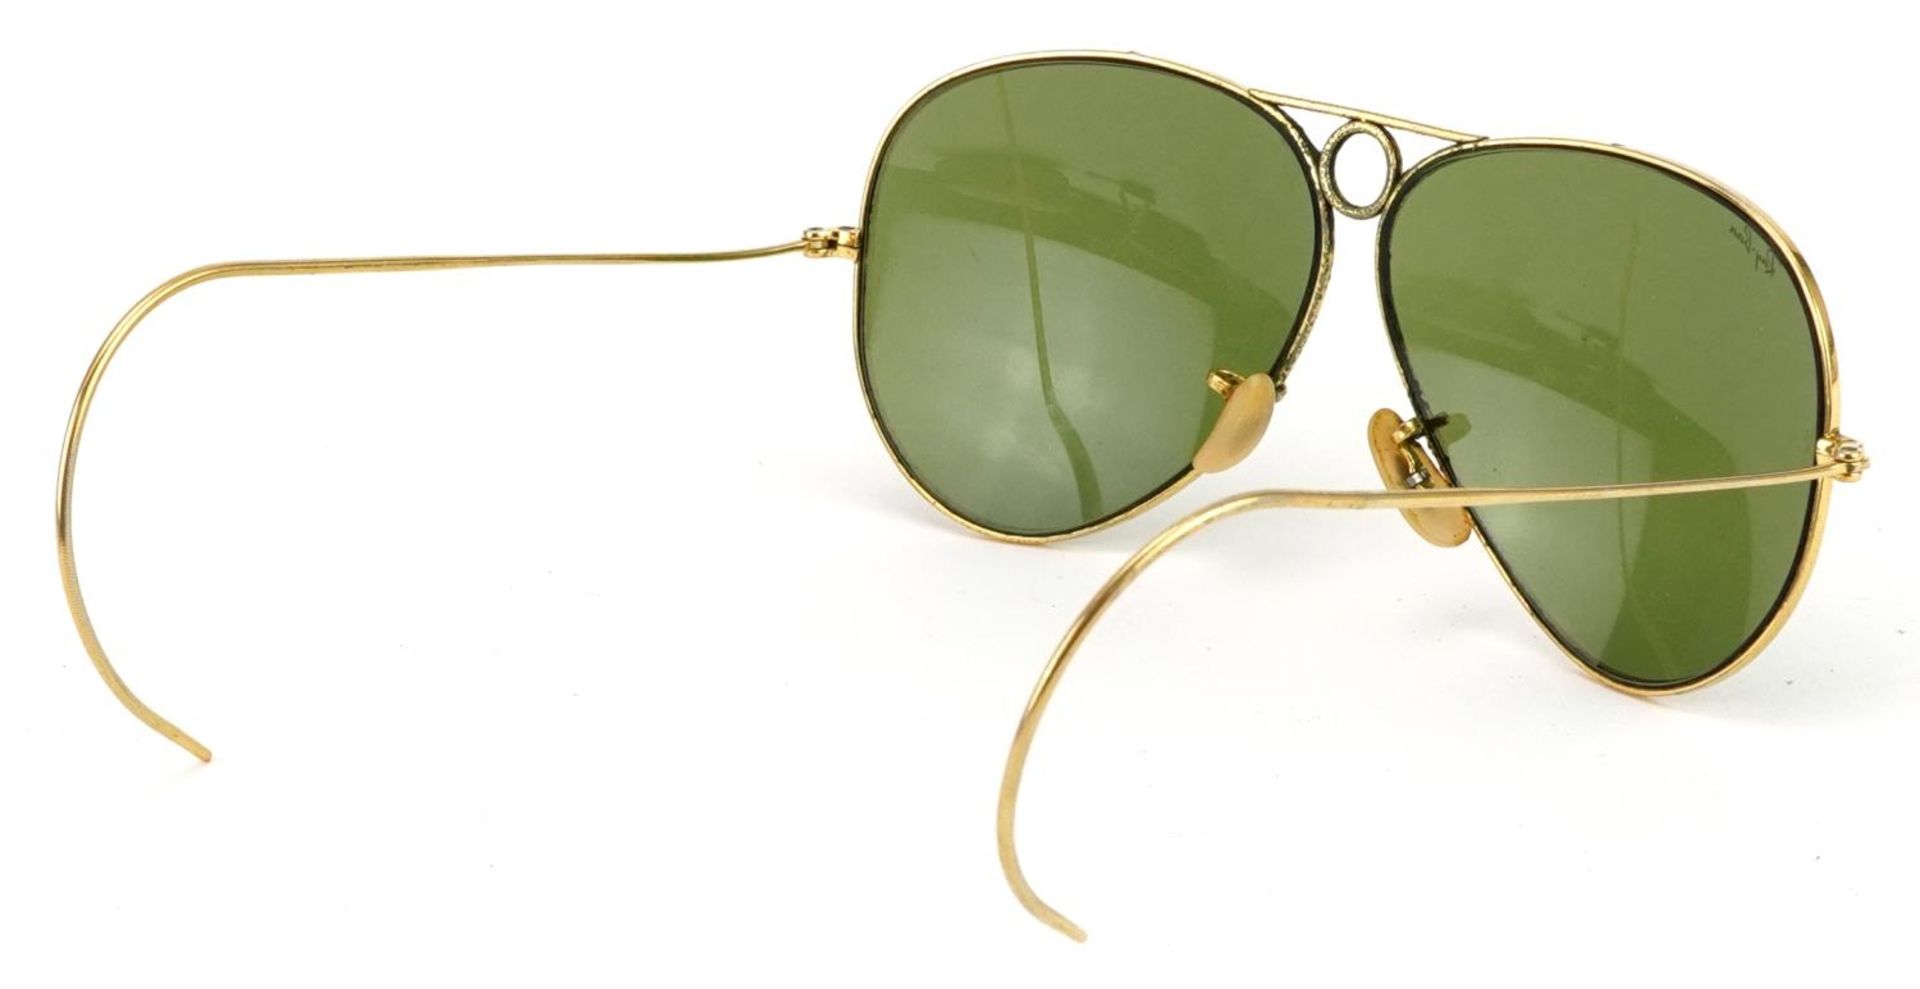 Pair of vintage Bausch & Lomb Ray-Ban aviator sunglasses : For further information on this lot - Image 2 of 3